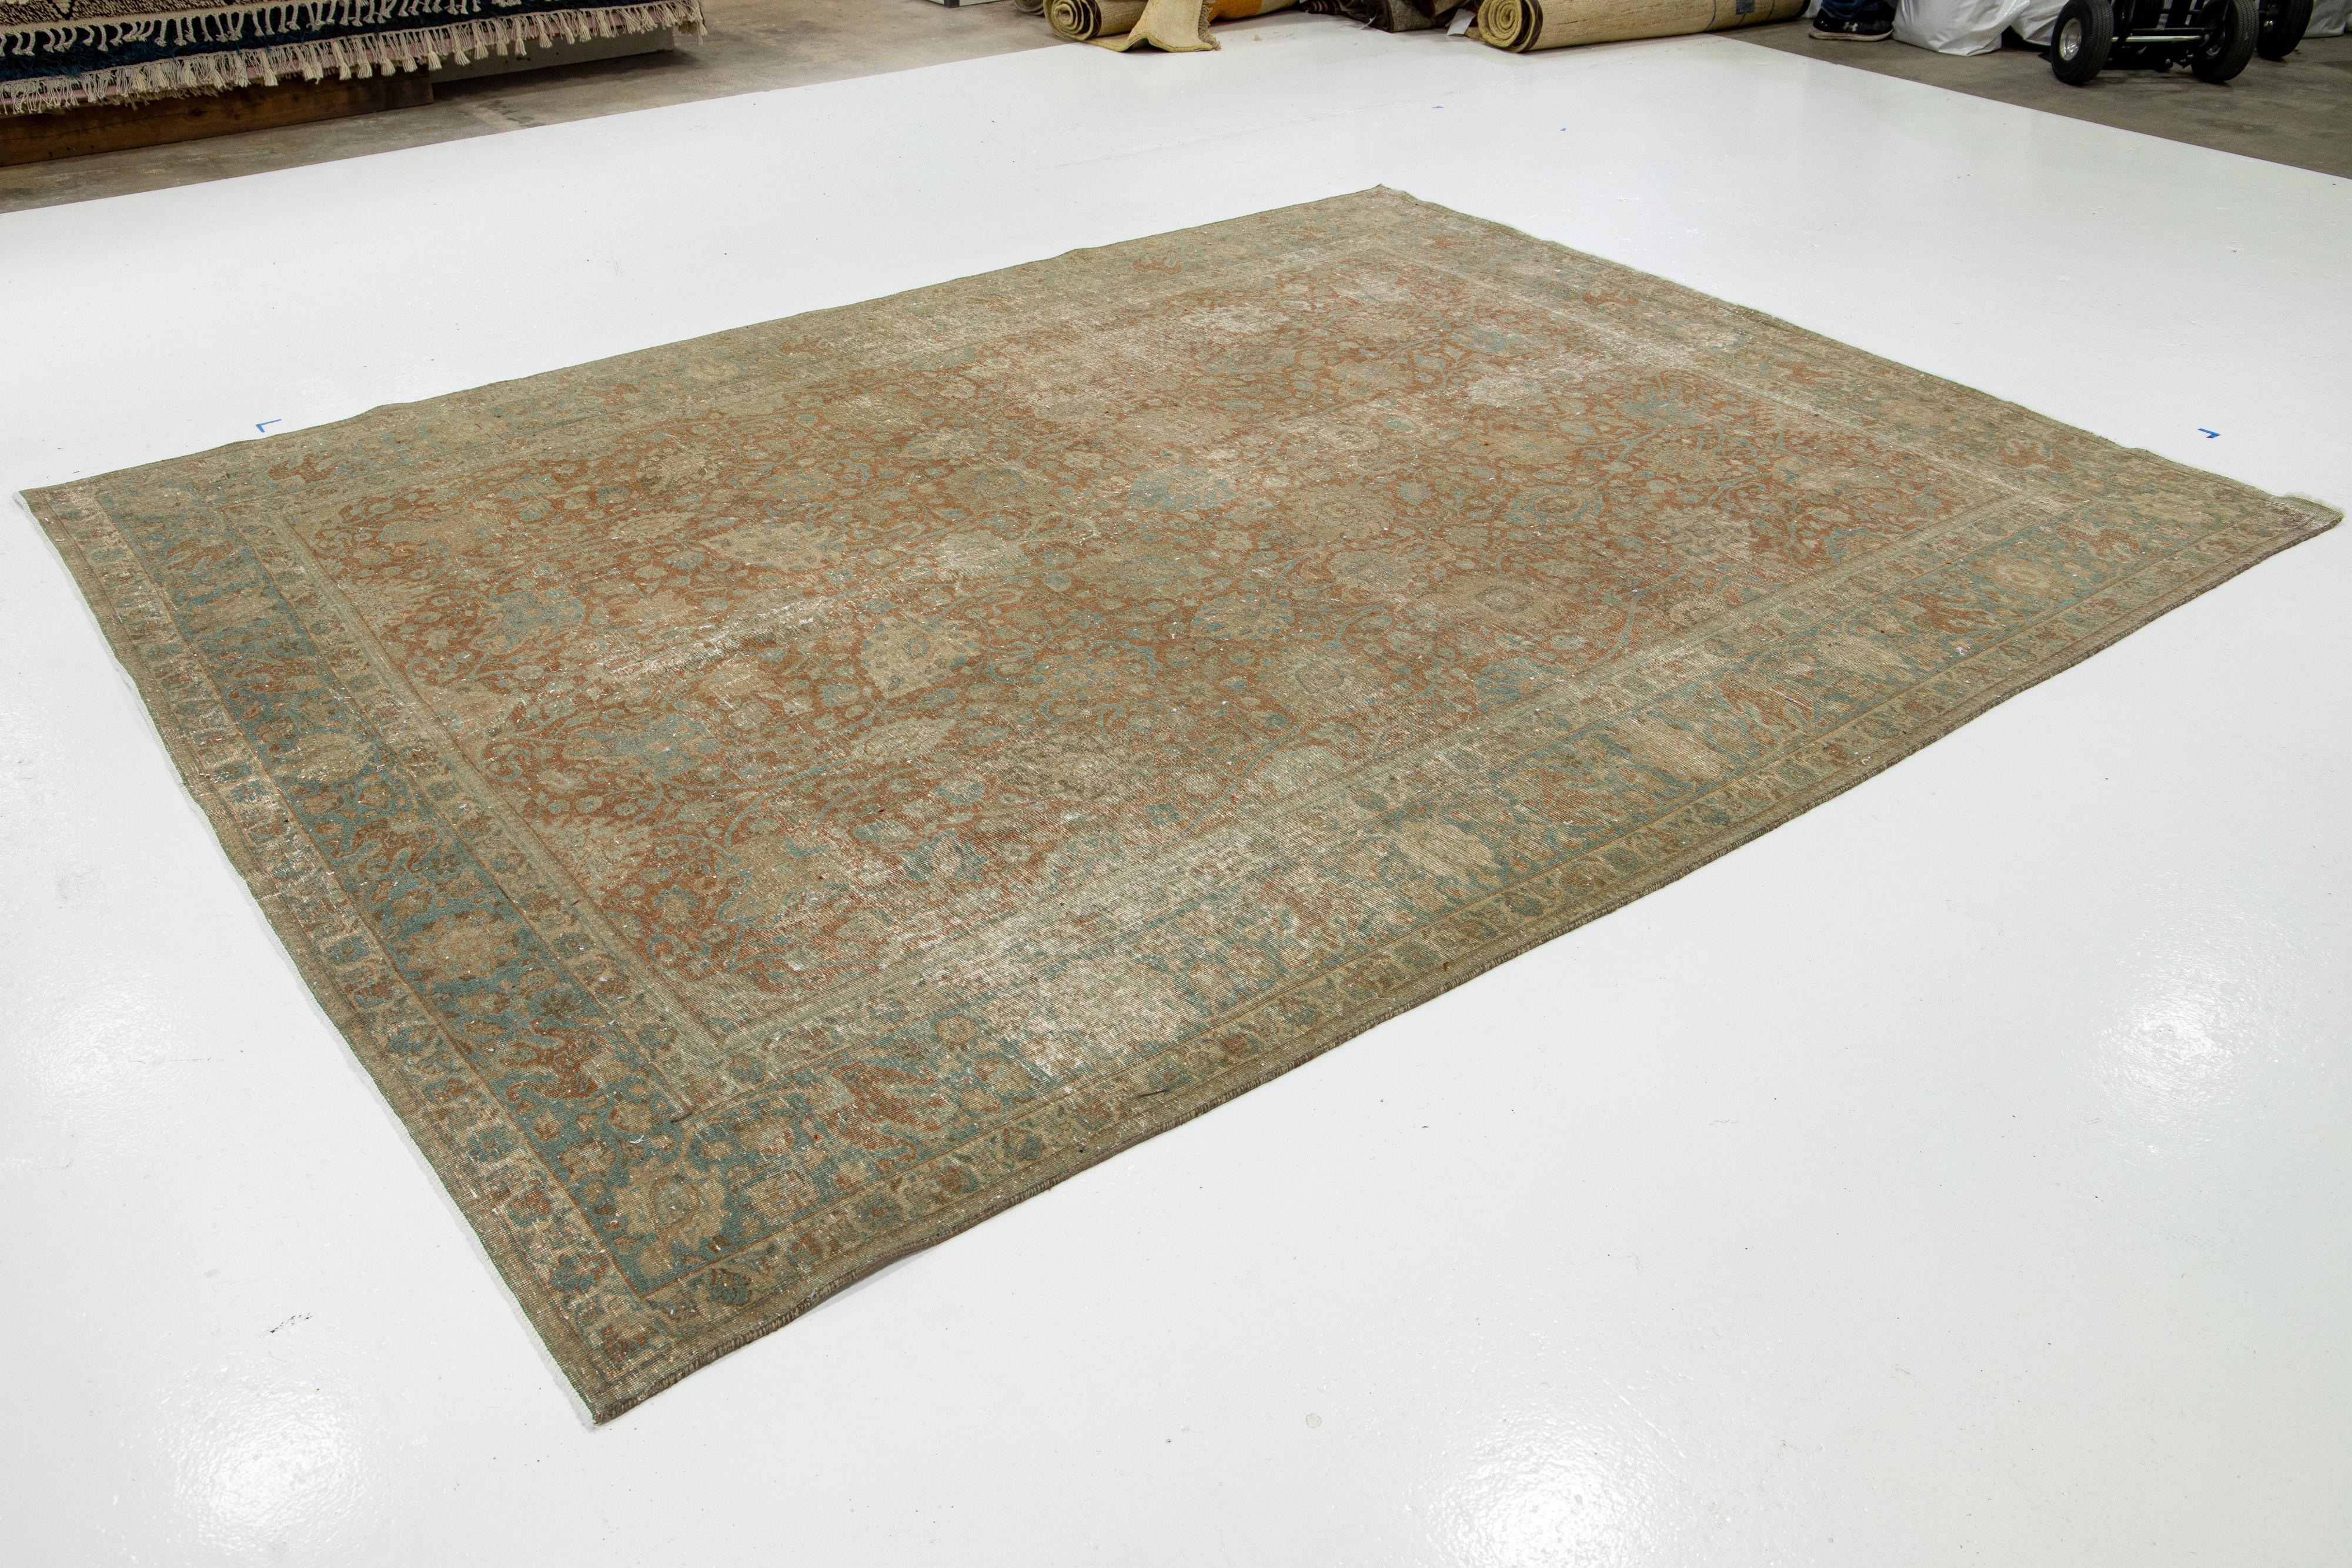 20th Century Antique Brown Wool Rug Persian Tabriz Floral Designed From The 1920s  For Sale